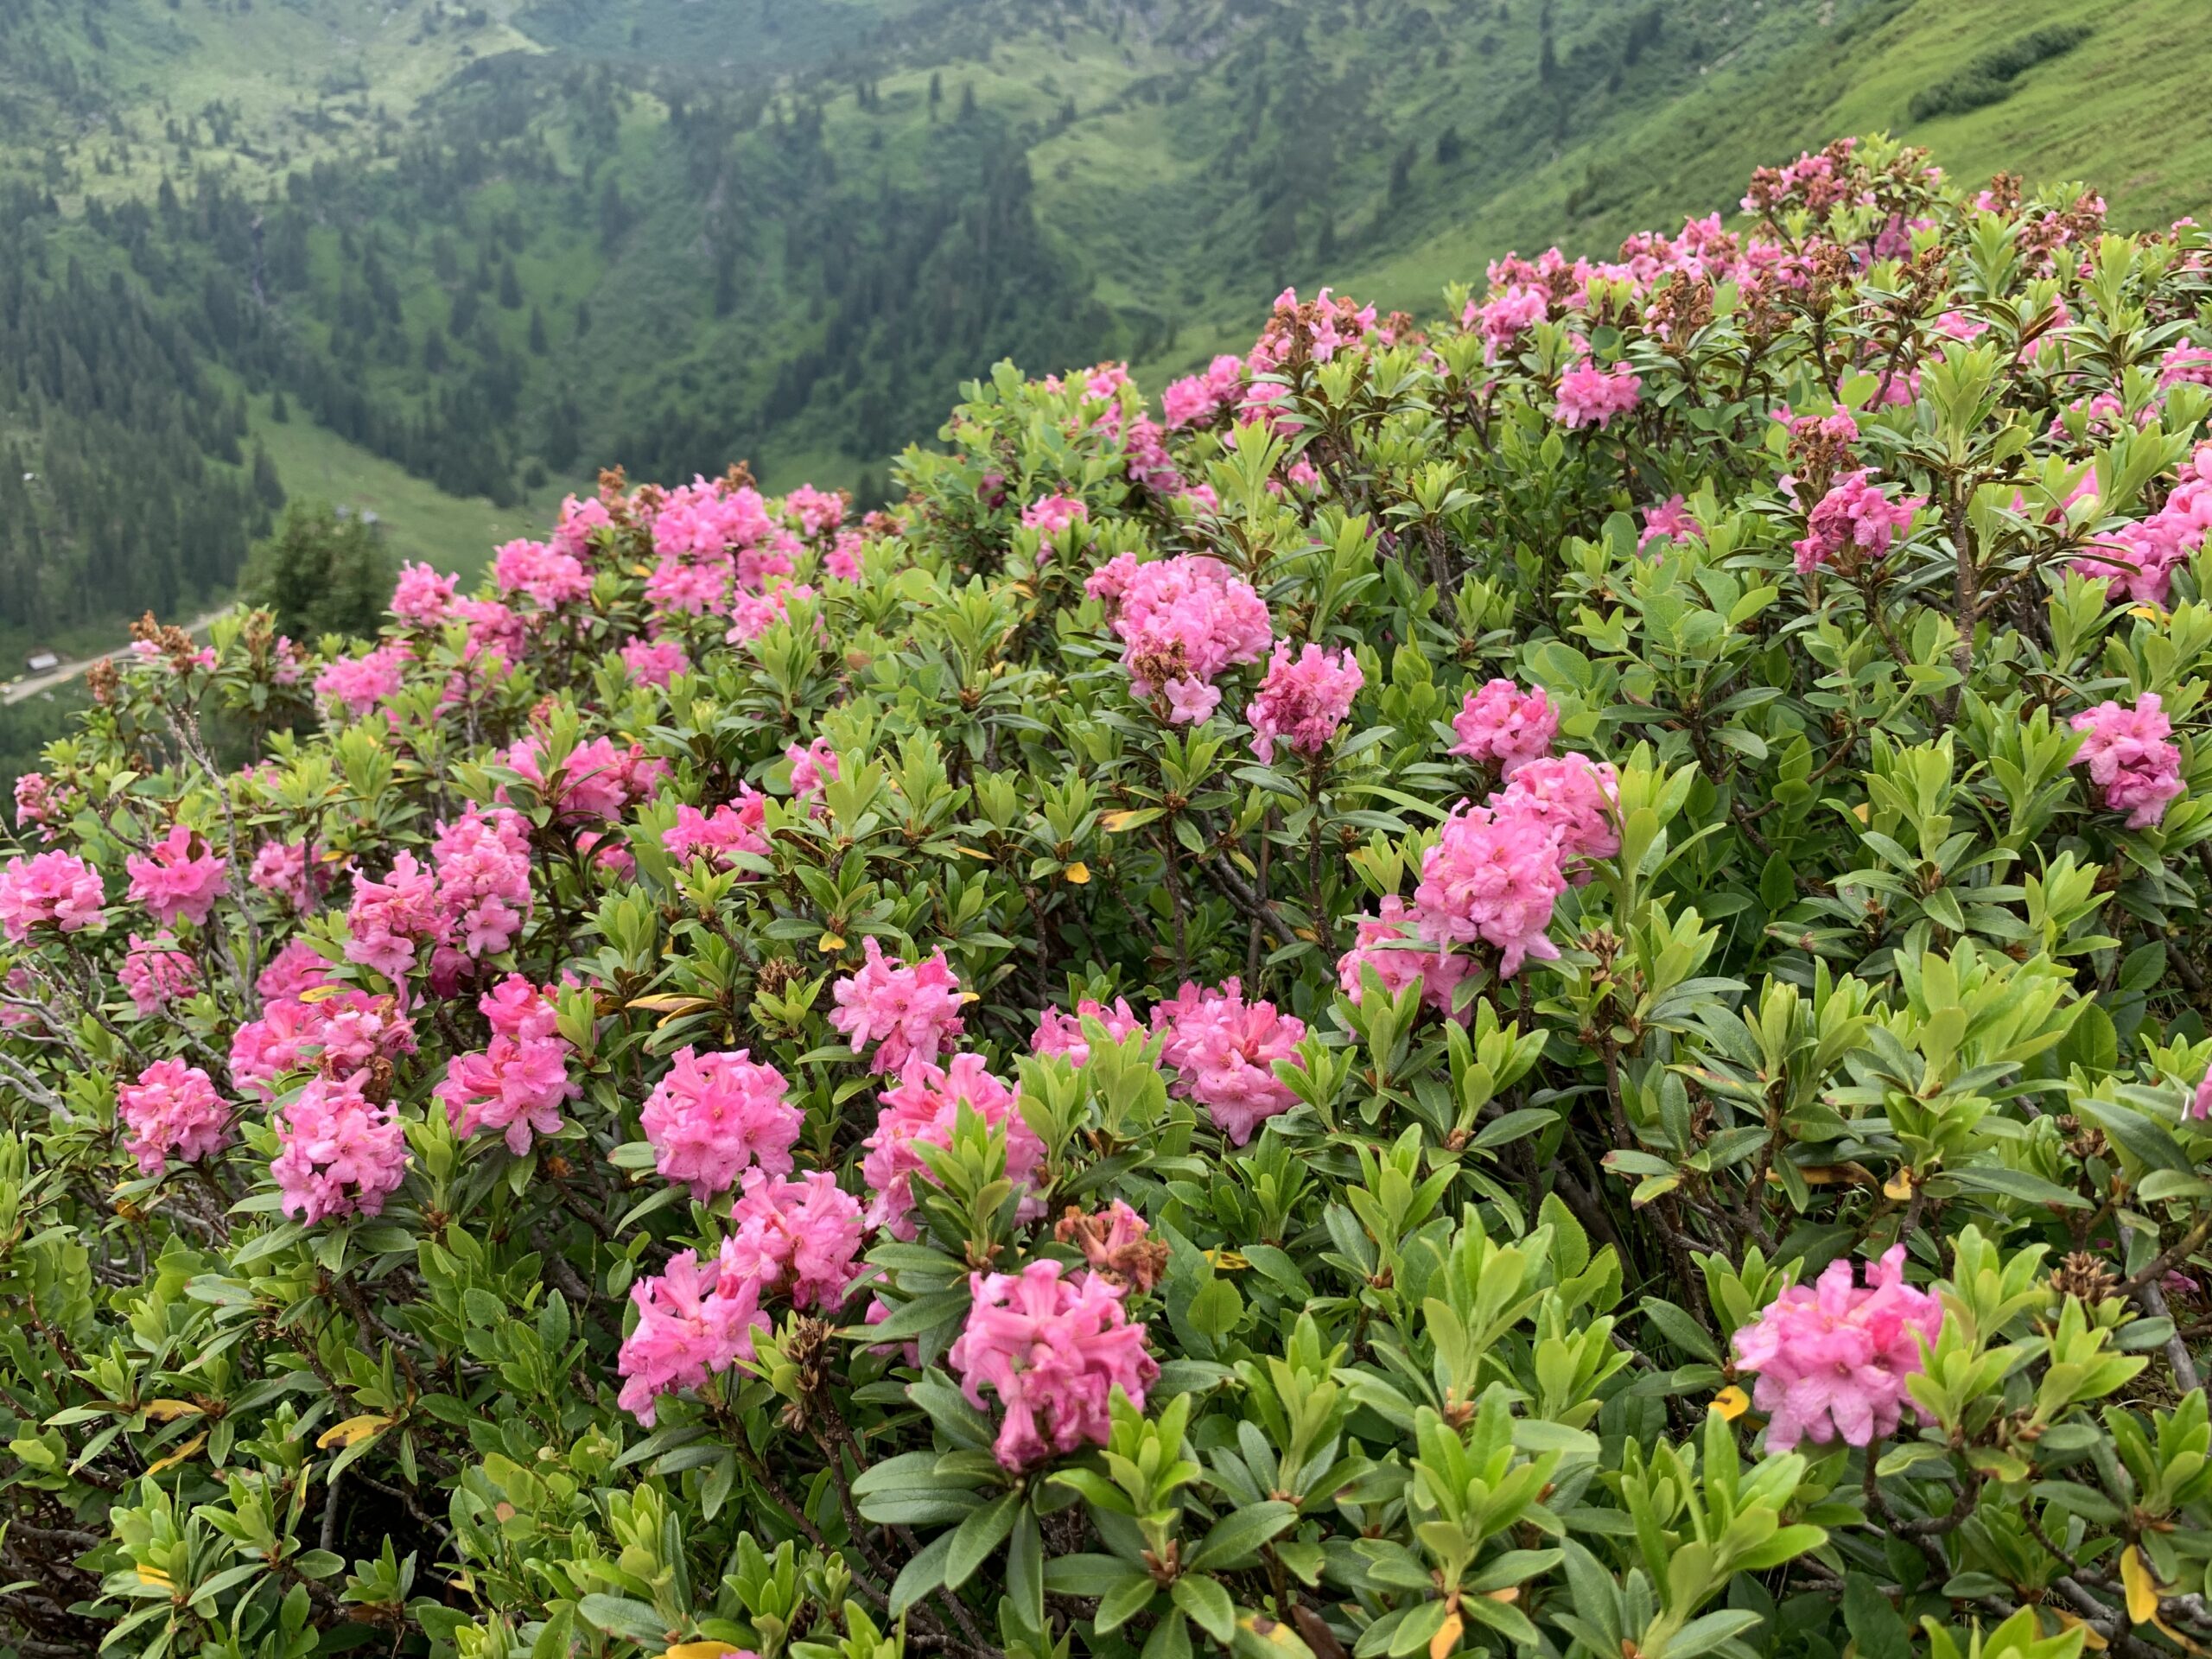 Flowers on the Riesneralm